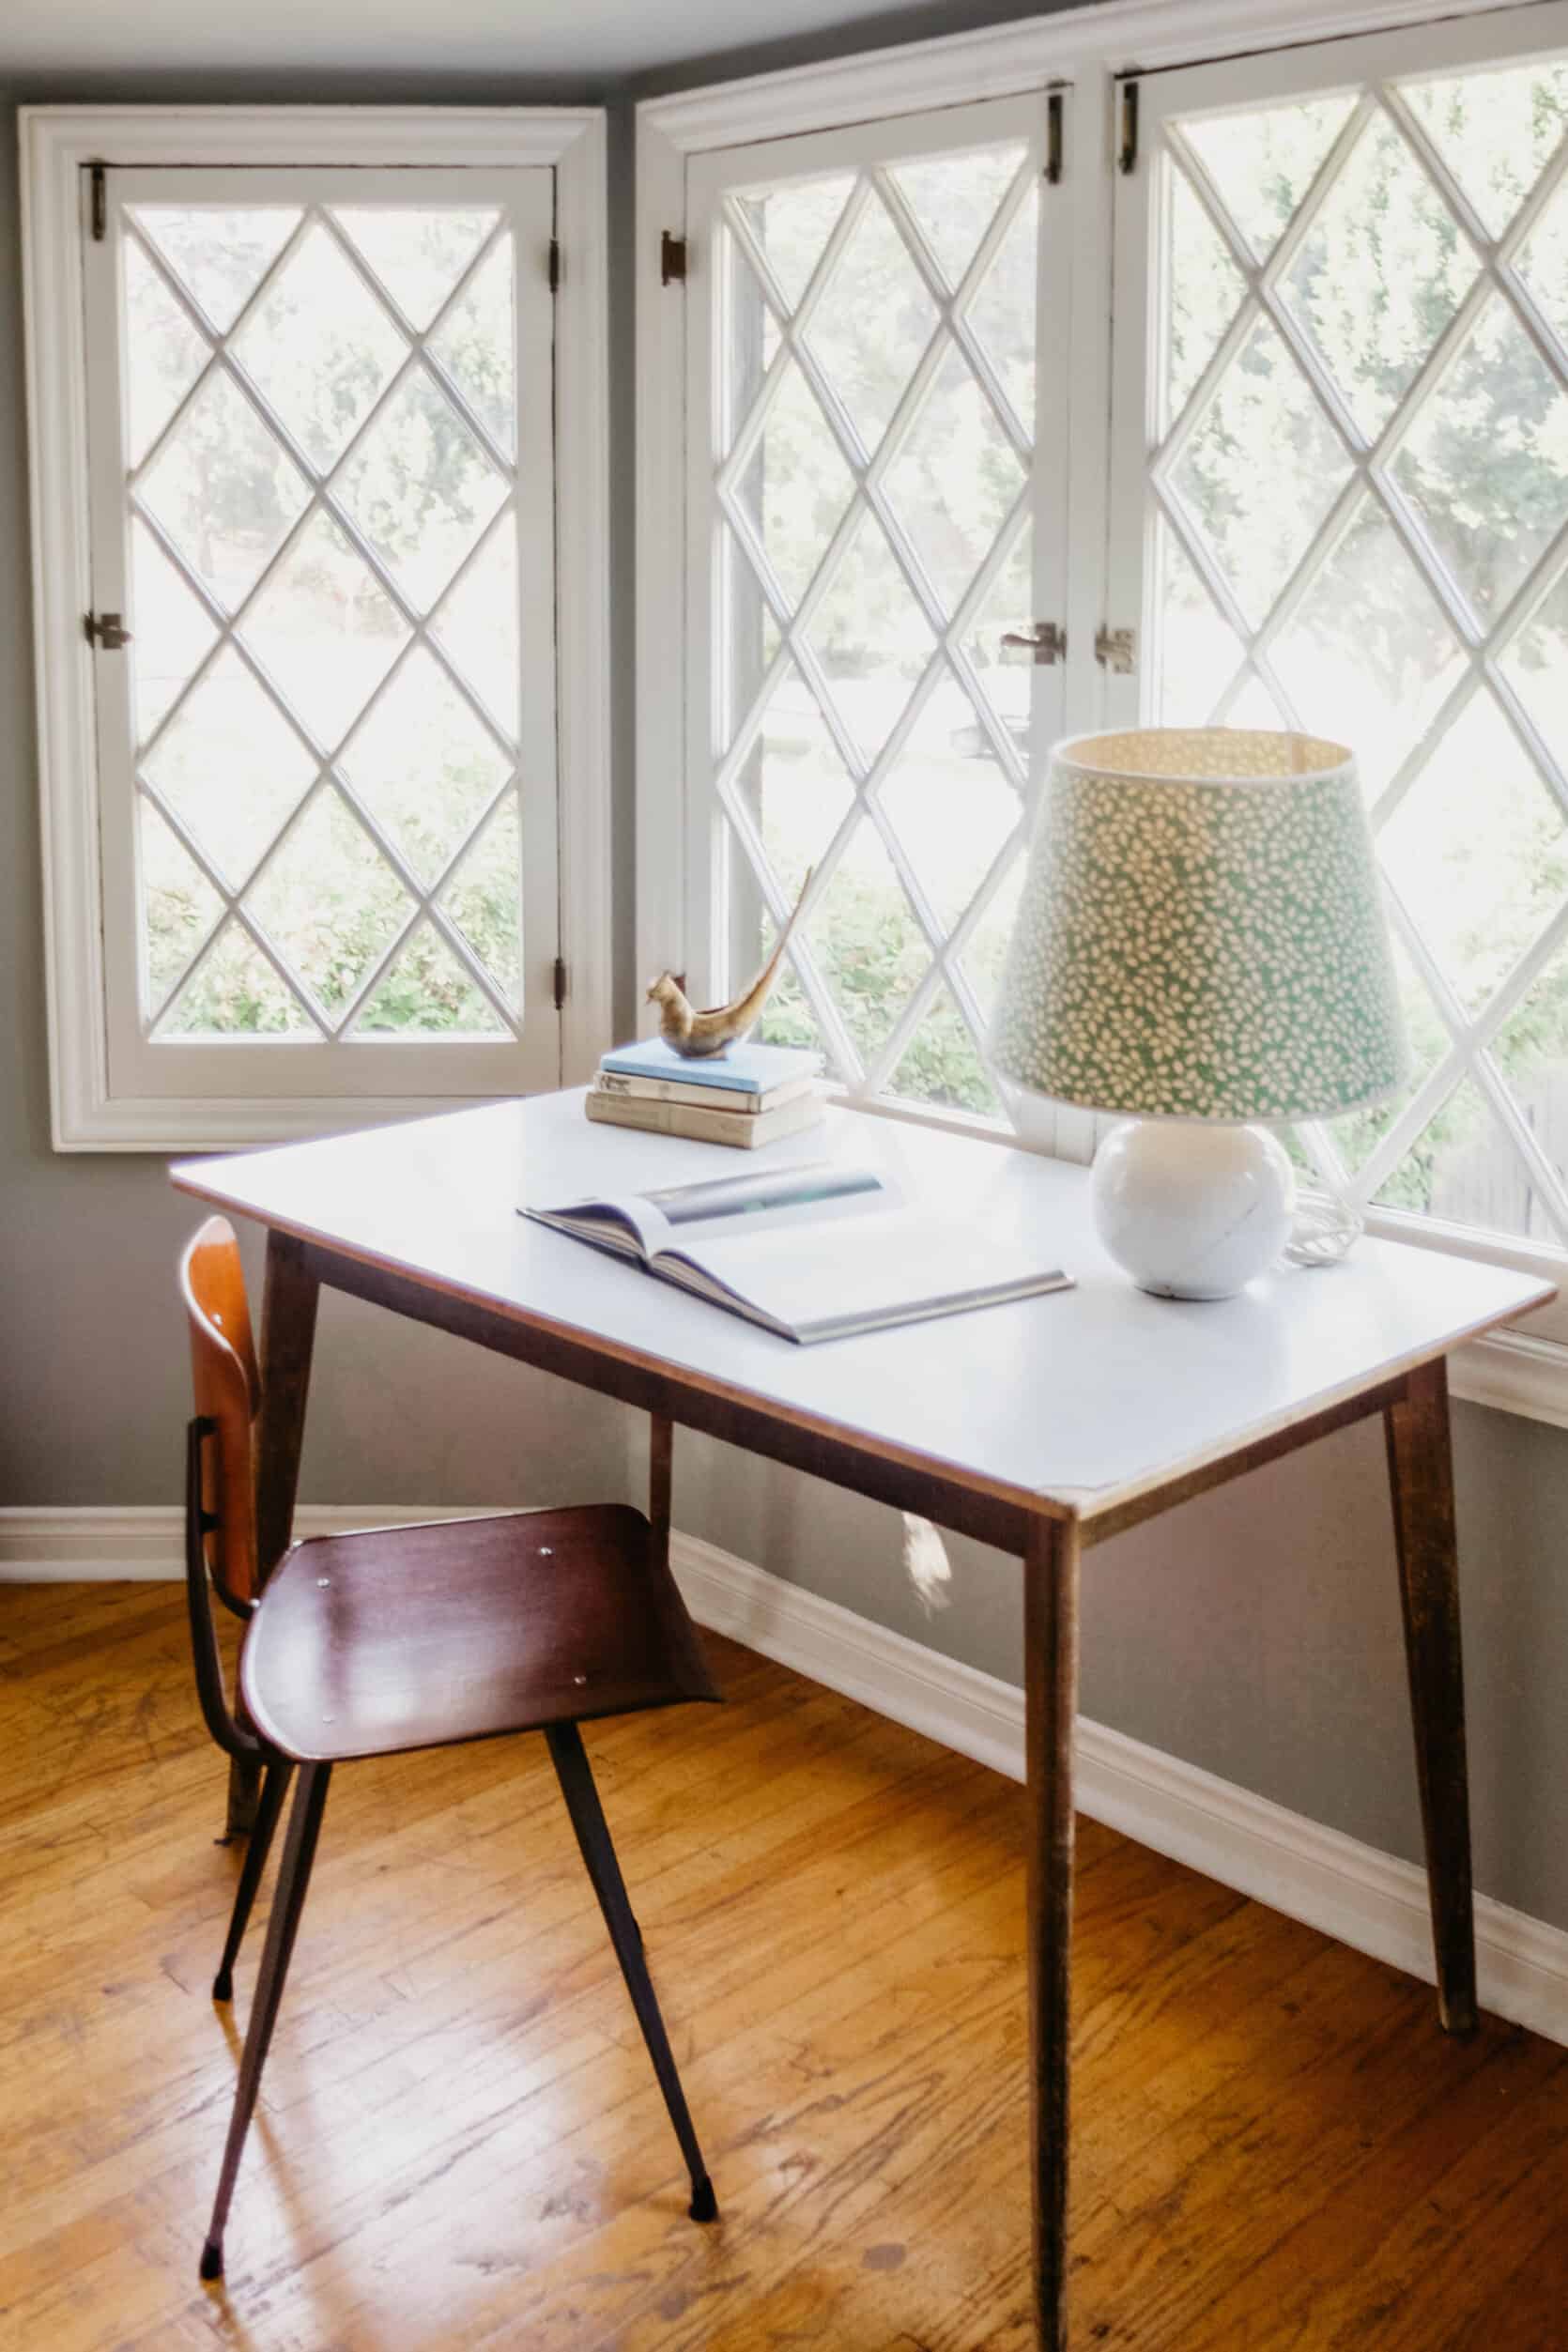 How to Lean Into Eclectic Granny The Minimalist Way (Via A Vintage Lover's Dream Home Tour)